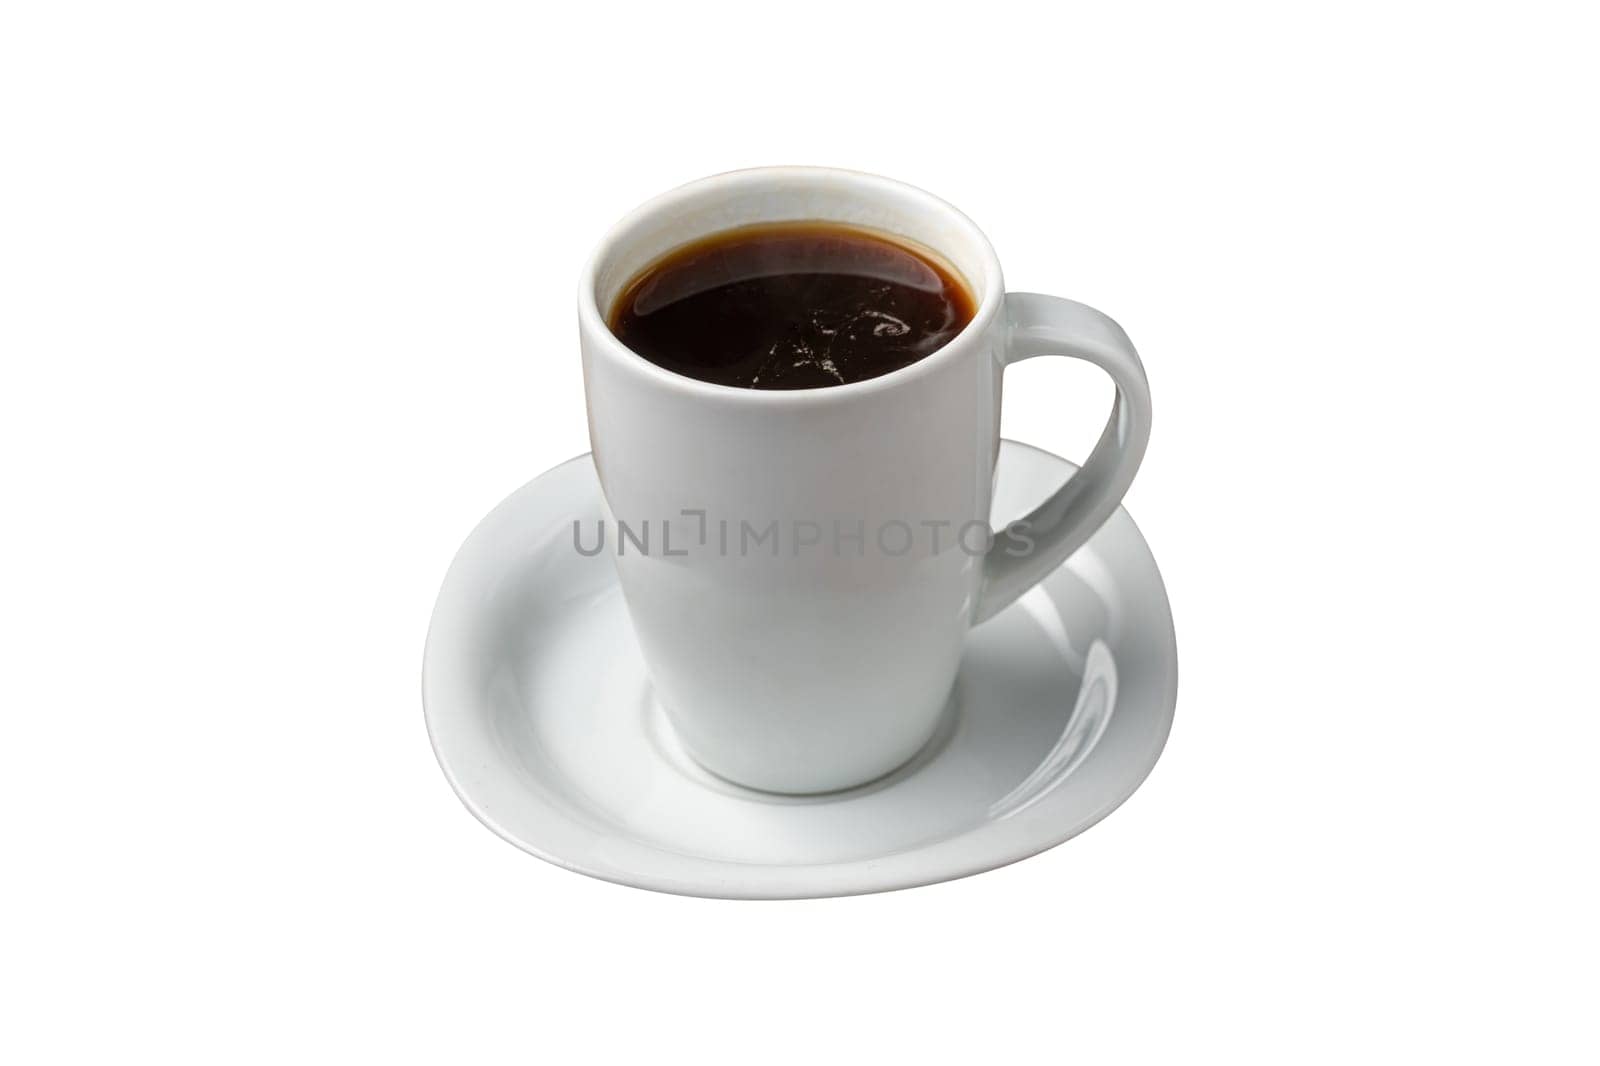 Filter coffee brewed in a filter coffee machine in a white porcelain cup by Sonat